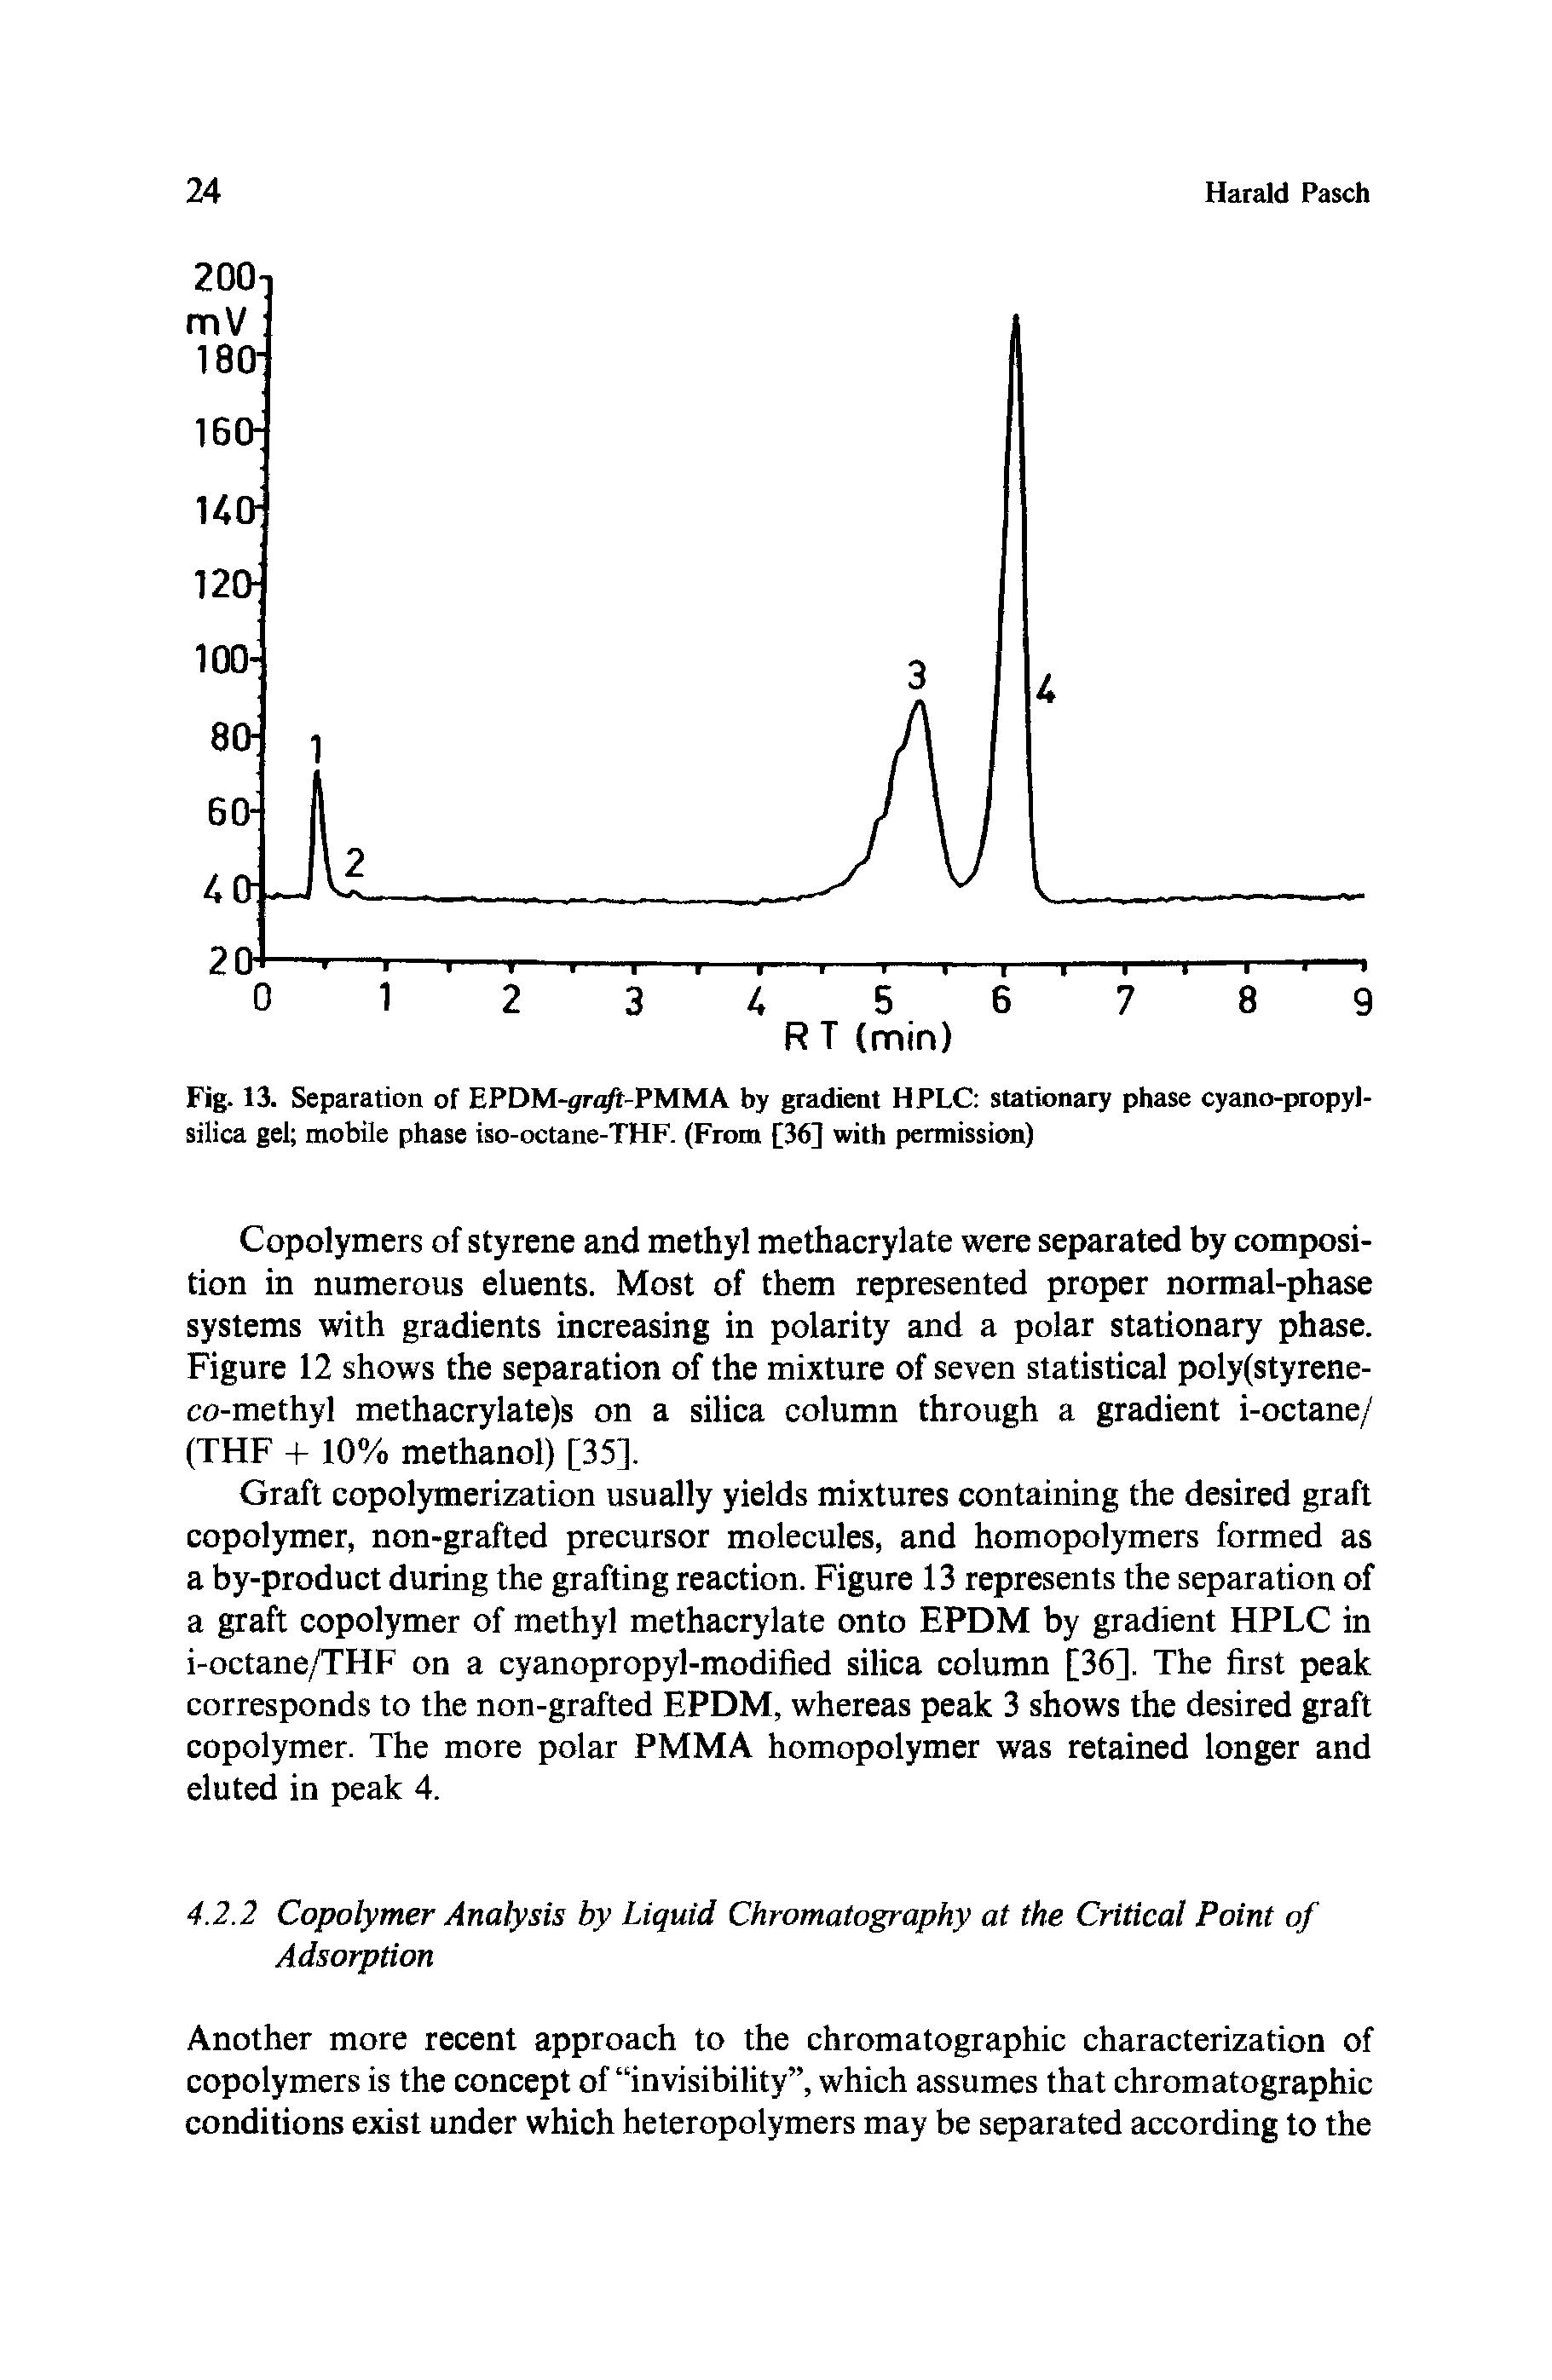 Fig. 13. Separation of EPDM- q/i-PMMA by gradient HPLC stationary phase cyano-propyl-silica gel mobile phase iso-octane-THF. (From [36] with permission)...